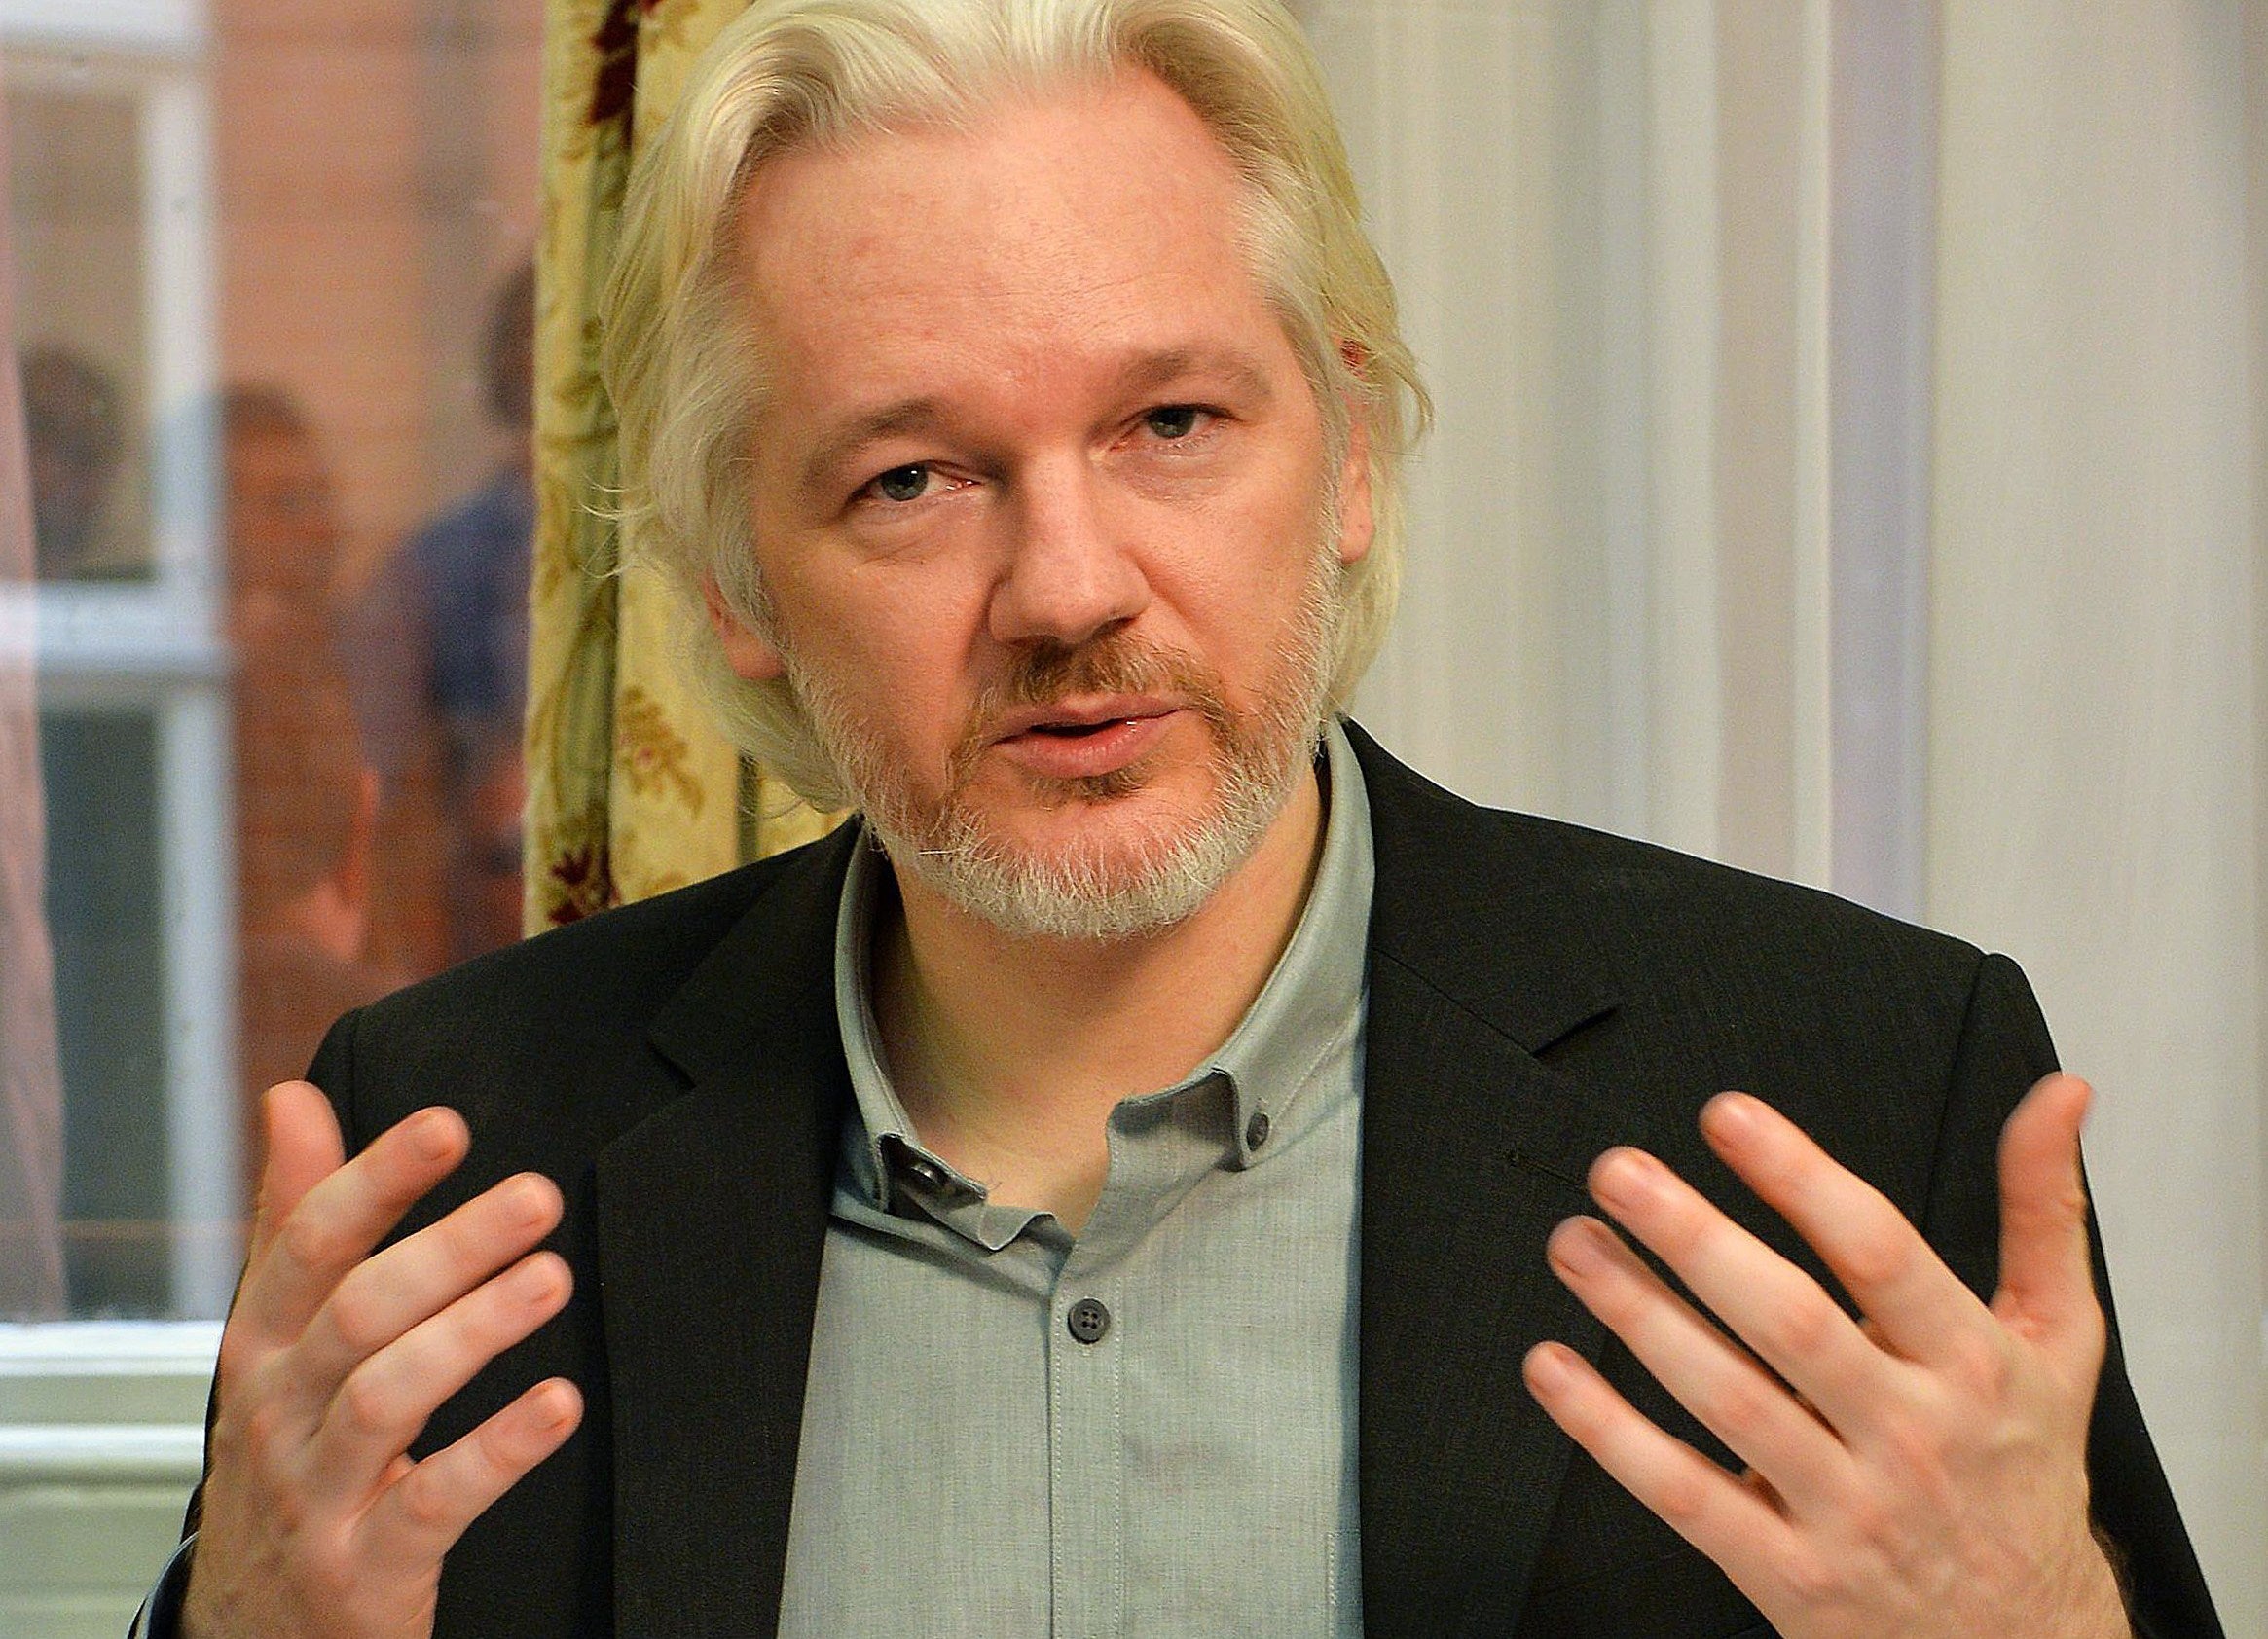 Wikileaks co-founder Julian Assange called Saudi Arabia "a menace to its neighbours and itself."